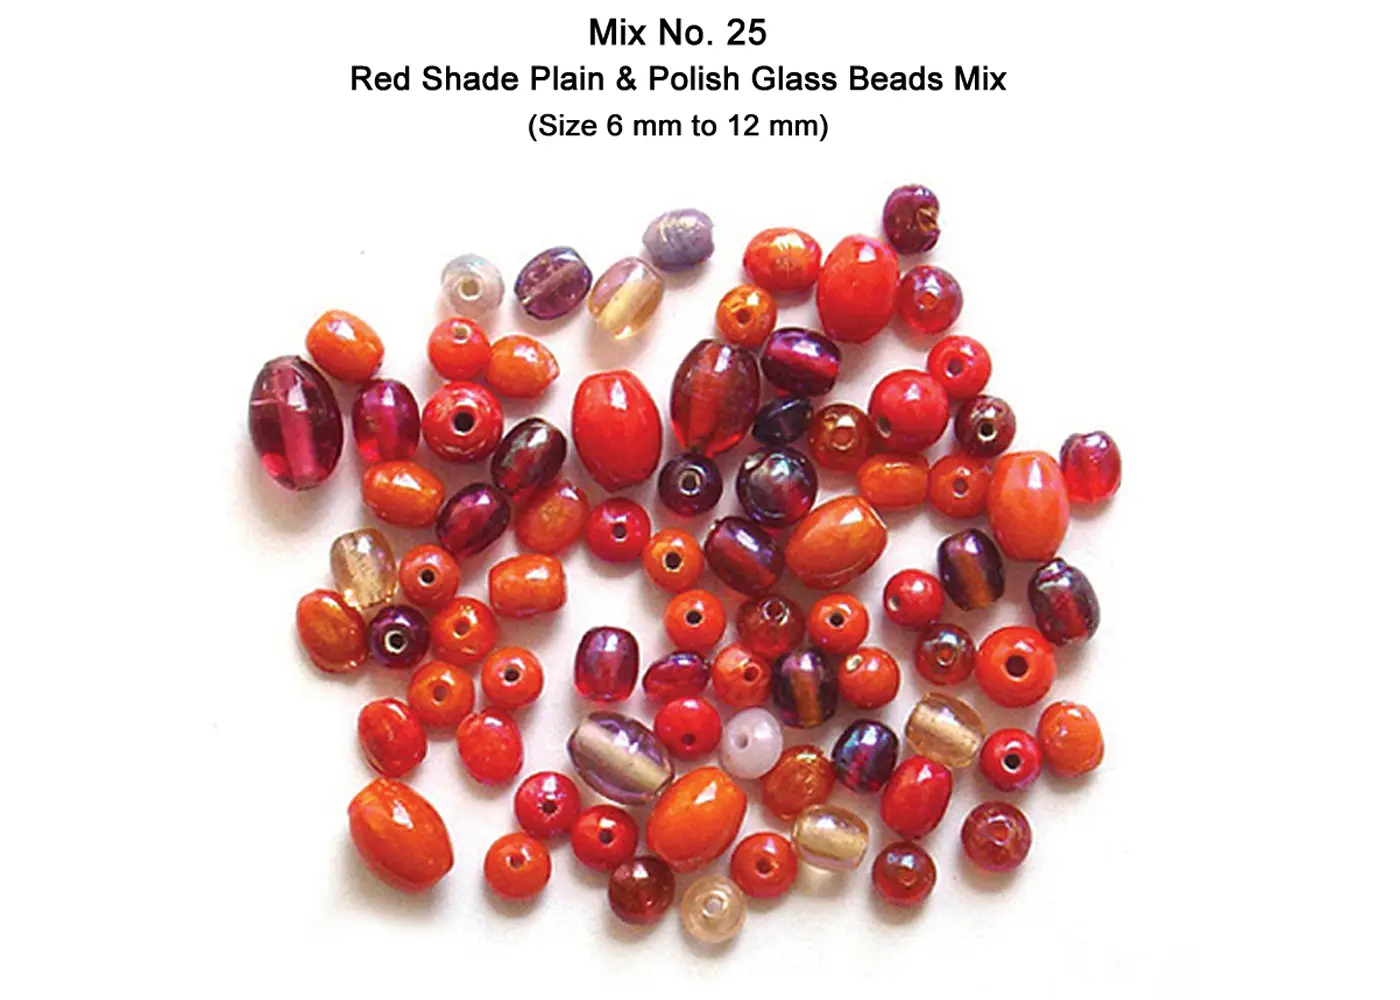 Red Color Plain with Polish Glass Beads Mix (Size 6 mm to 12 mm)